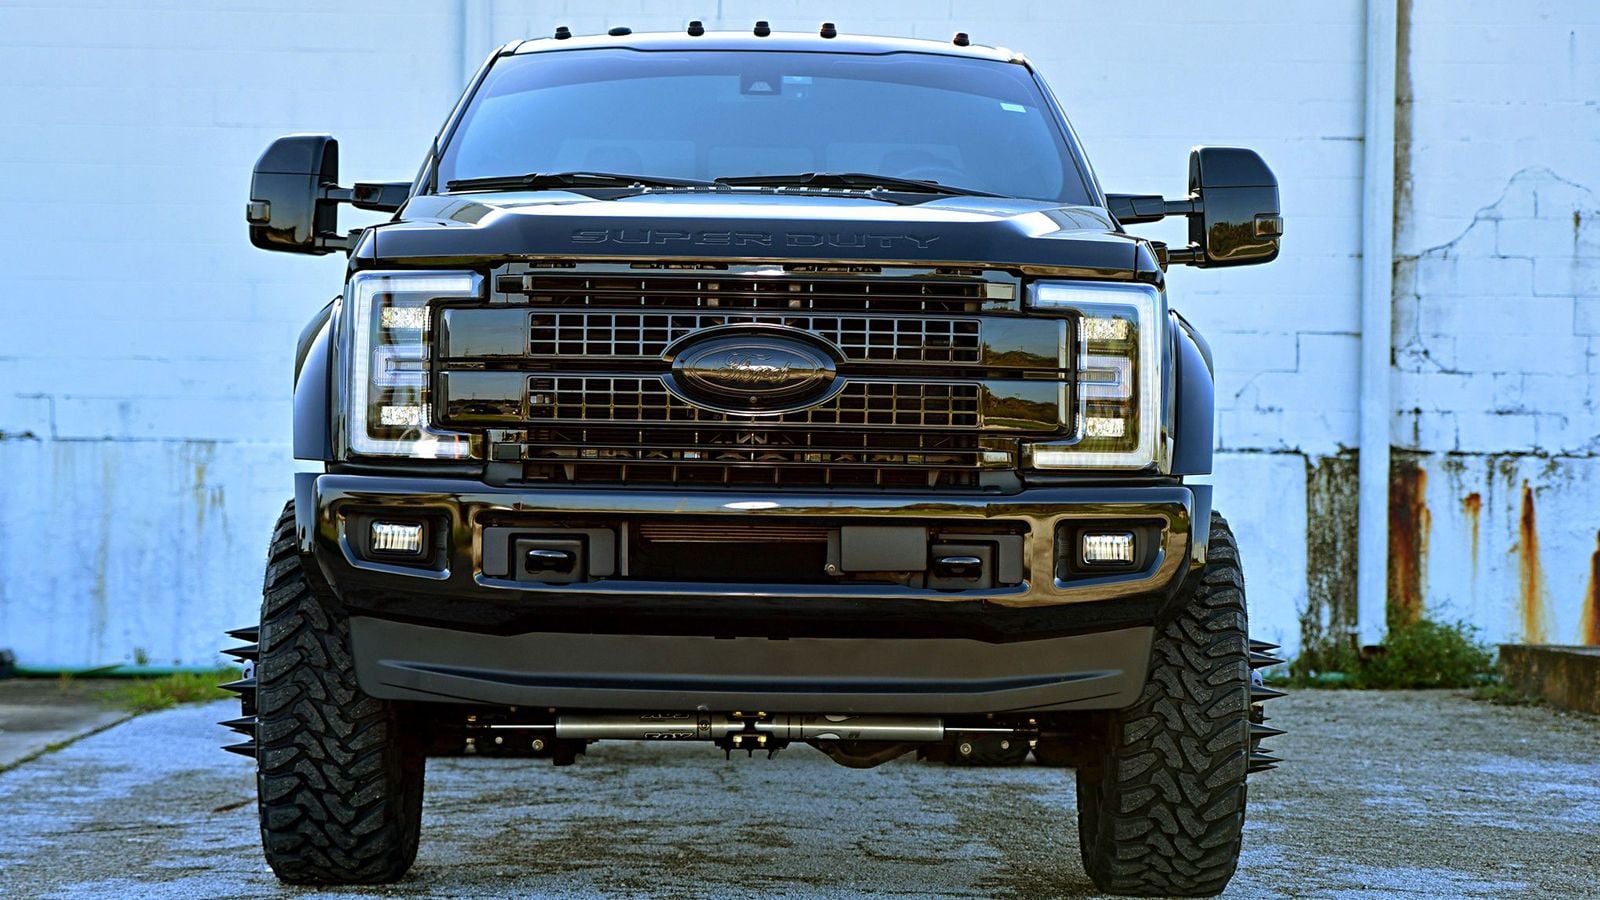 Black Lifted Ford Trucks All In One Photos